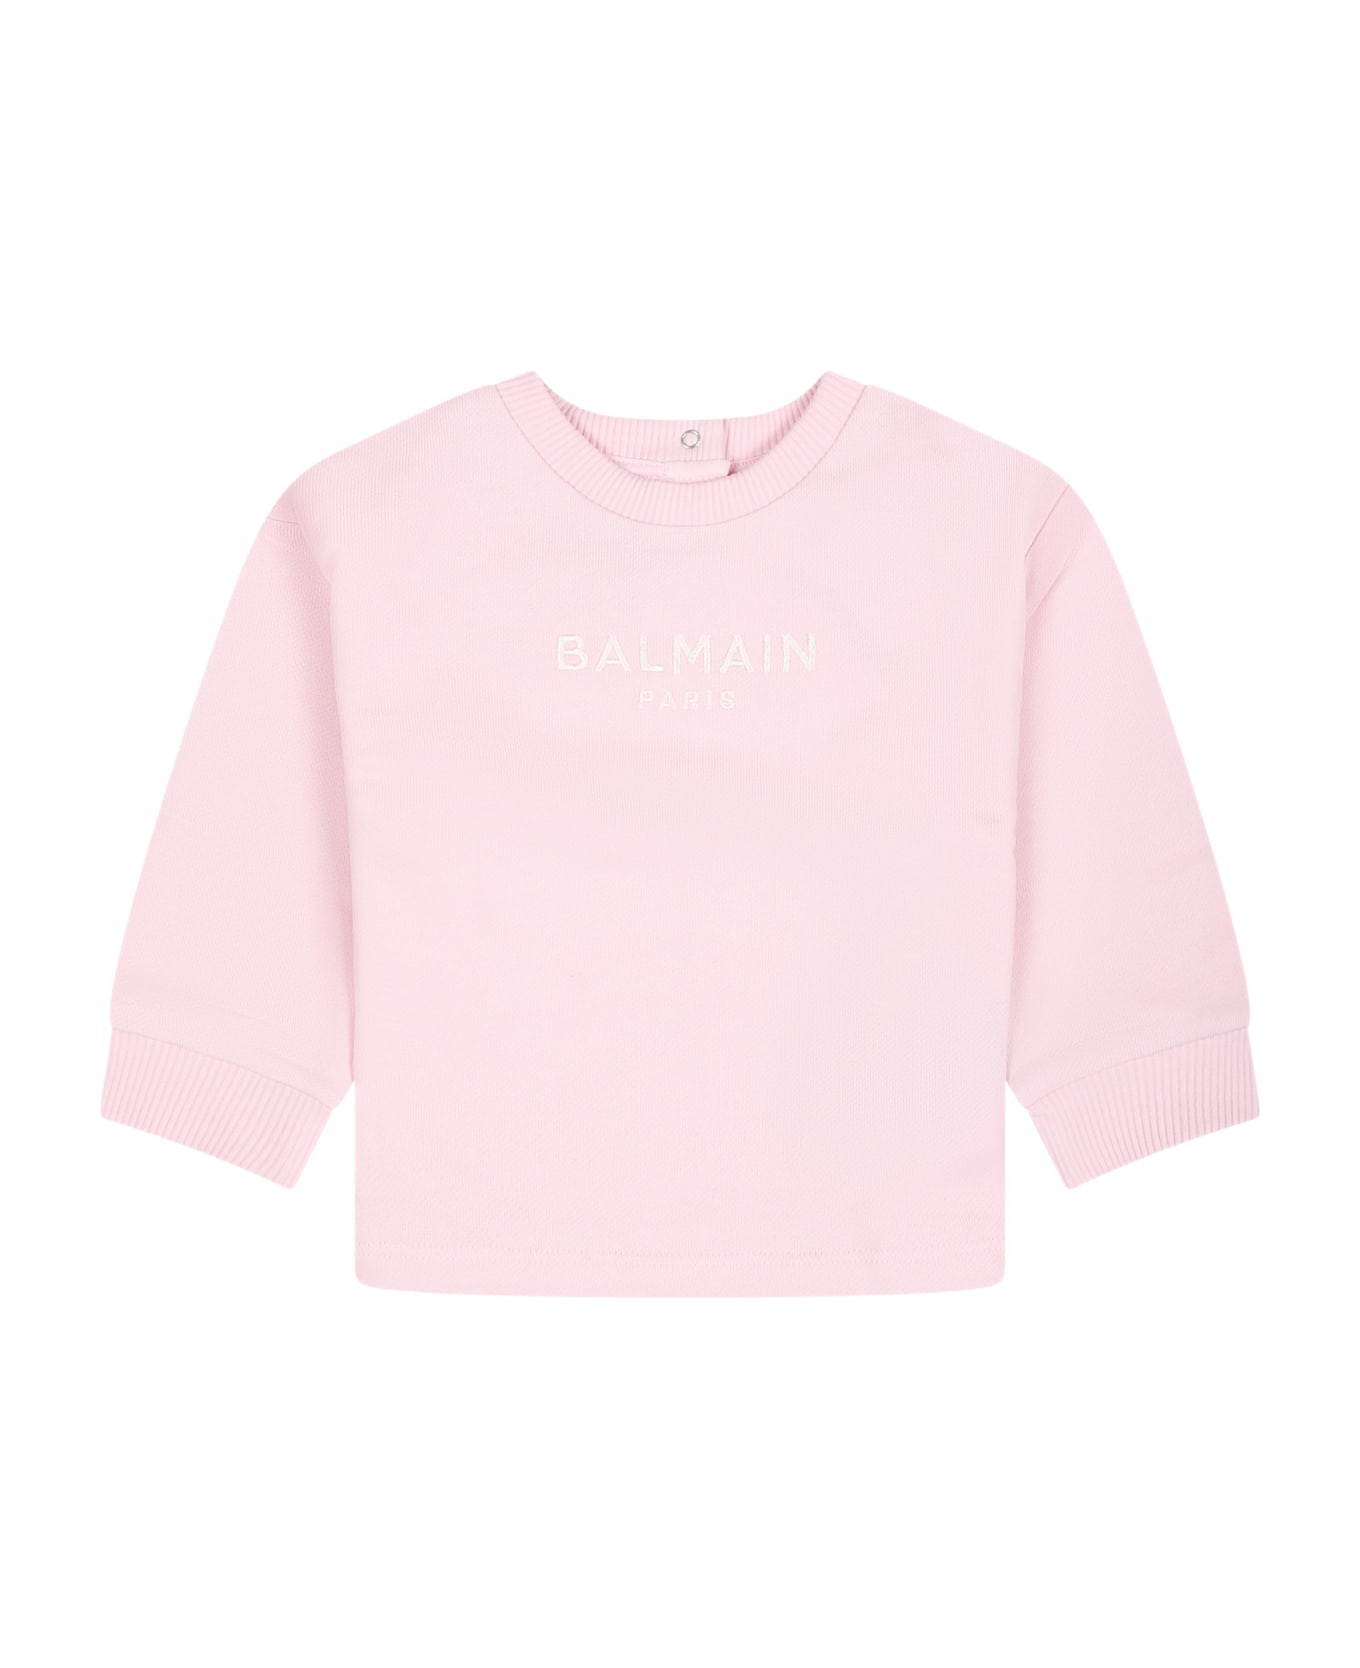 Balmain Pink Sweatshirt For Baby Girl With Embroidered Logo - Pink